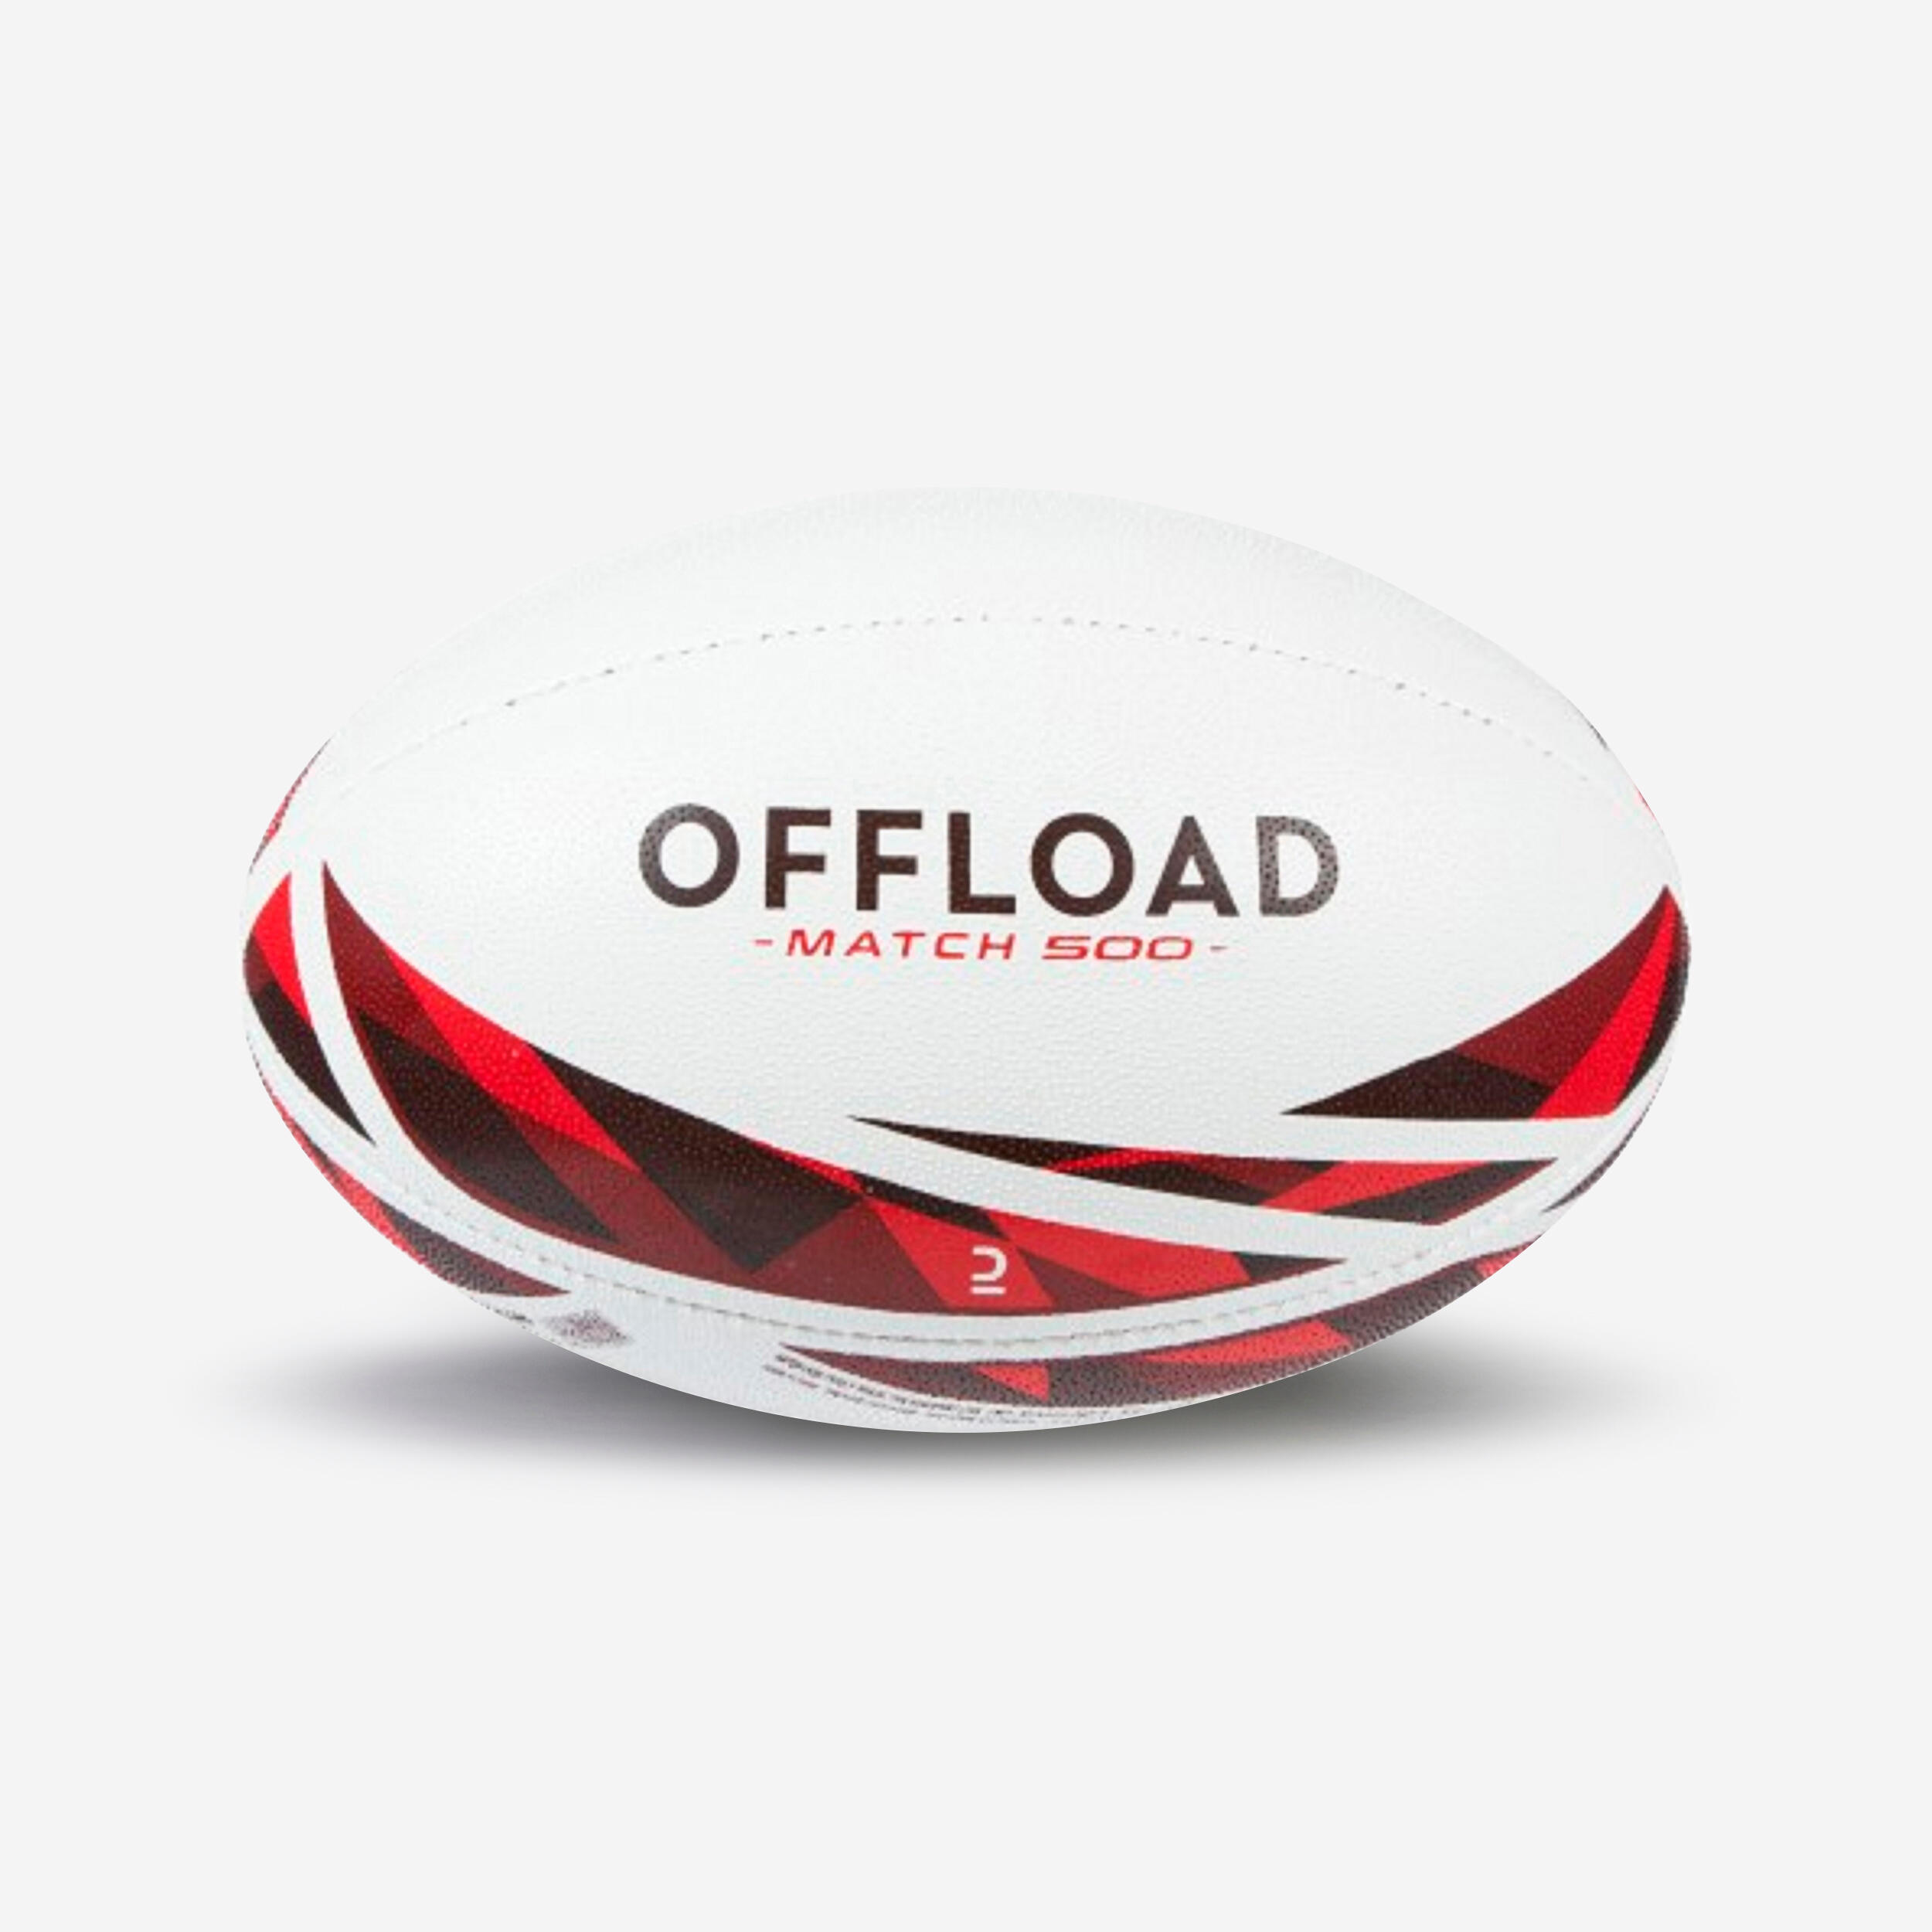 OFFLOAD Ballon De Rugby Taille 4 - R500 Match Rouge Blanc